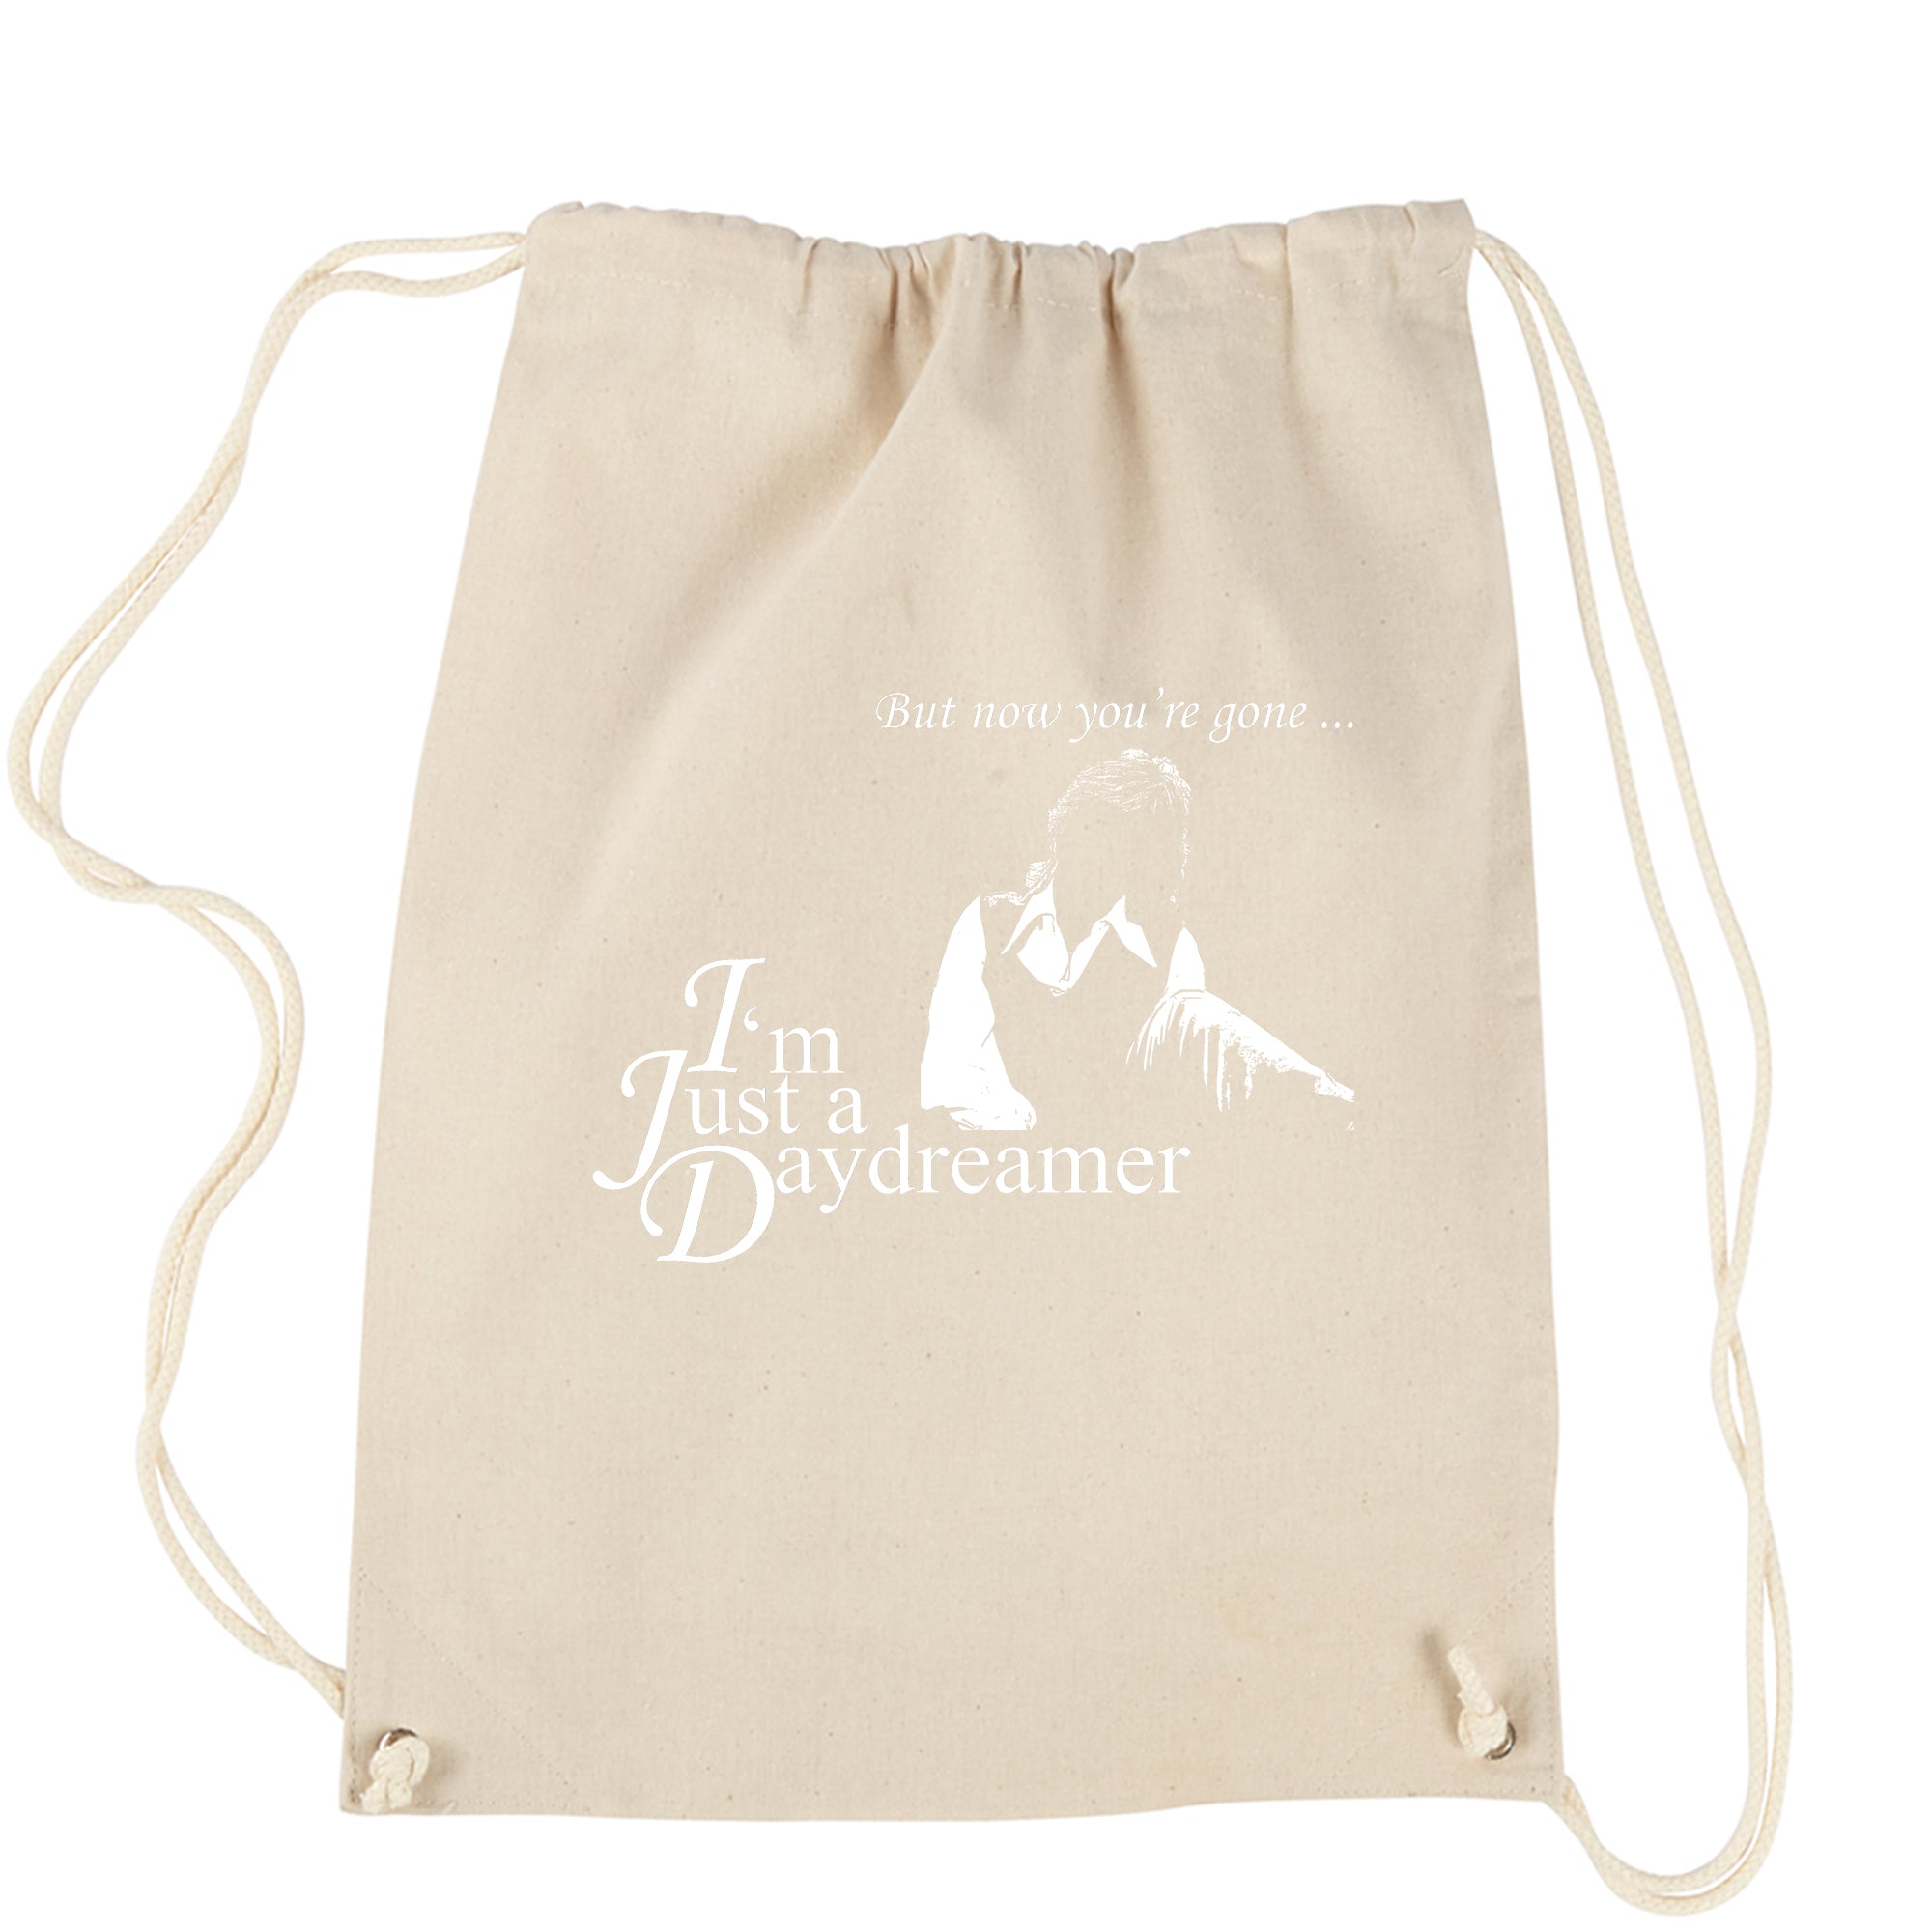 Cassidy Daydreamer Tribute Drawstring Backpack